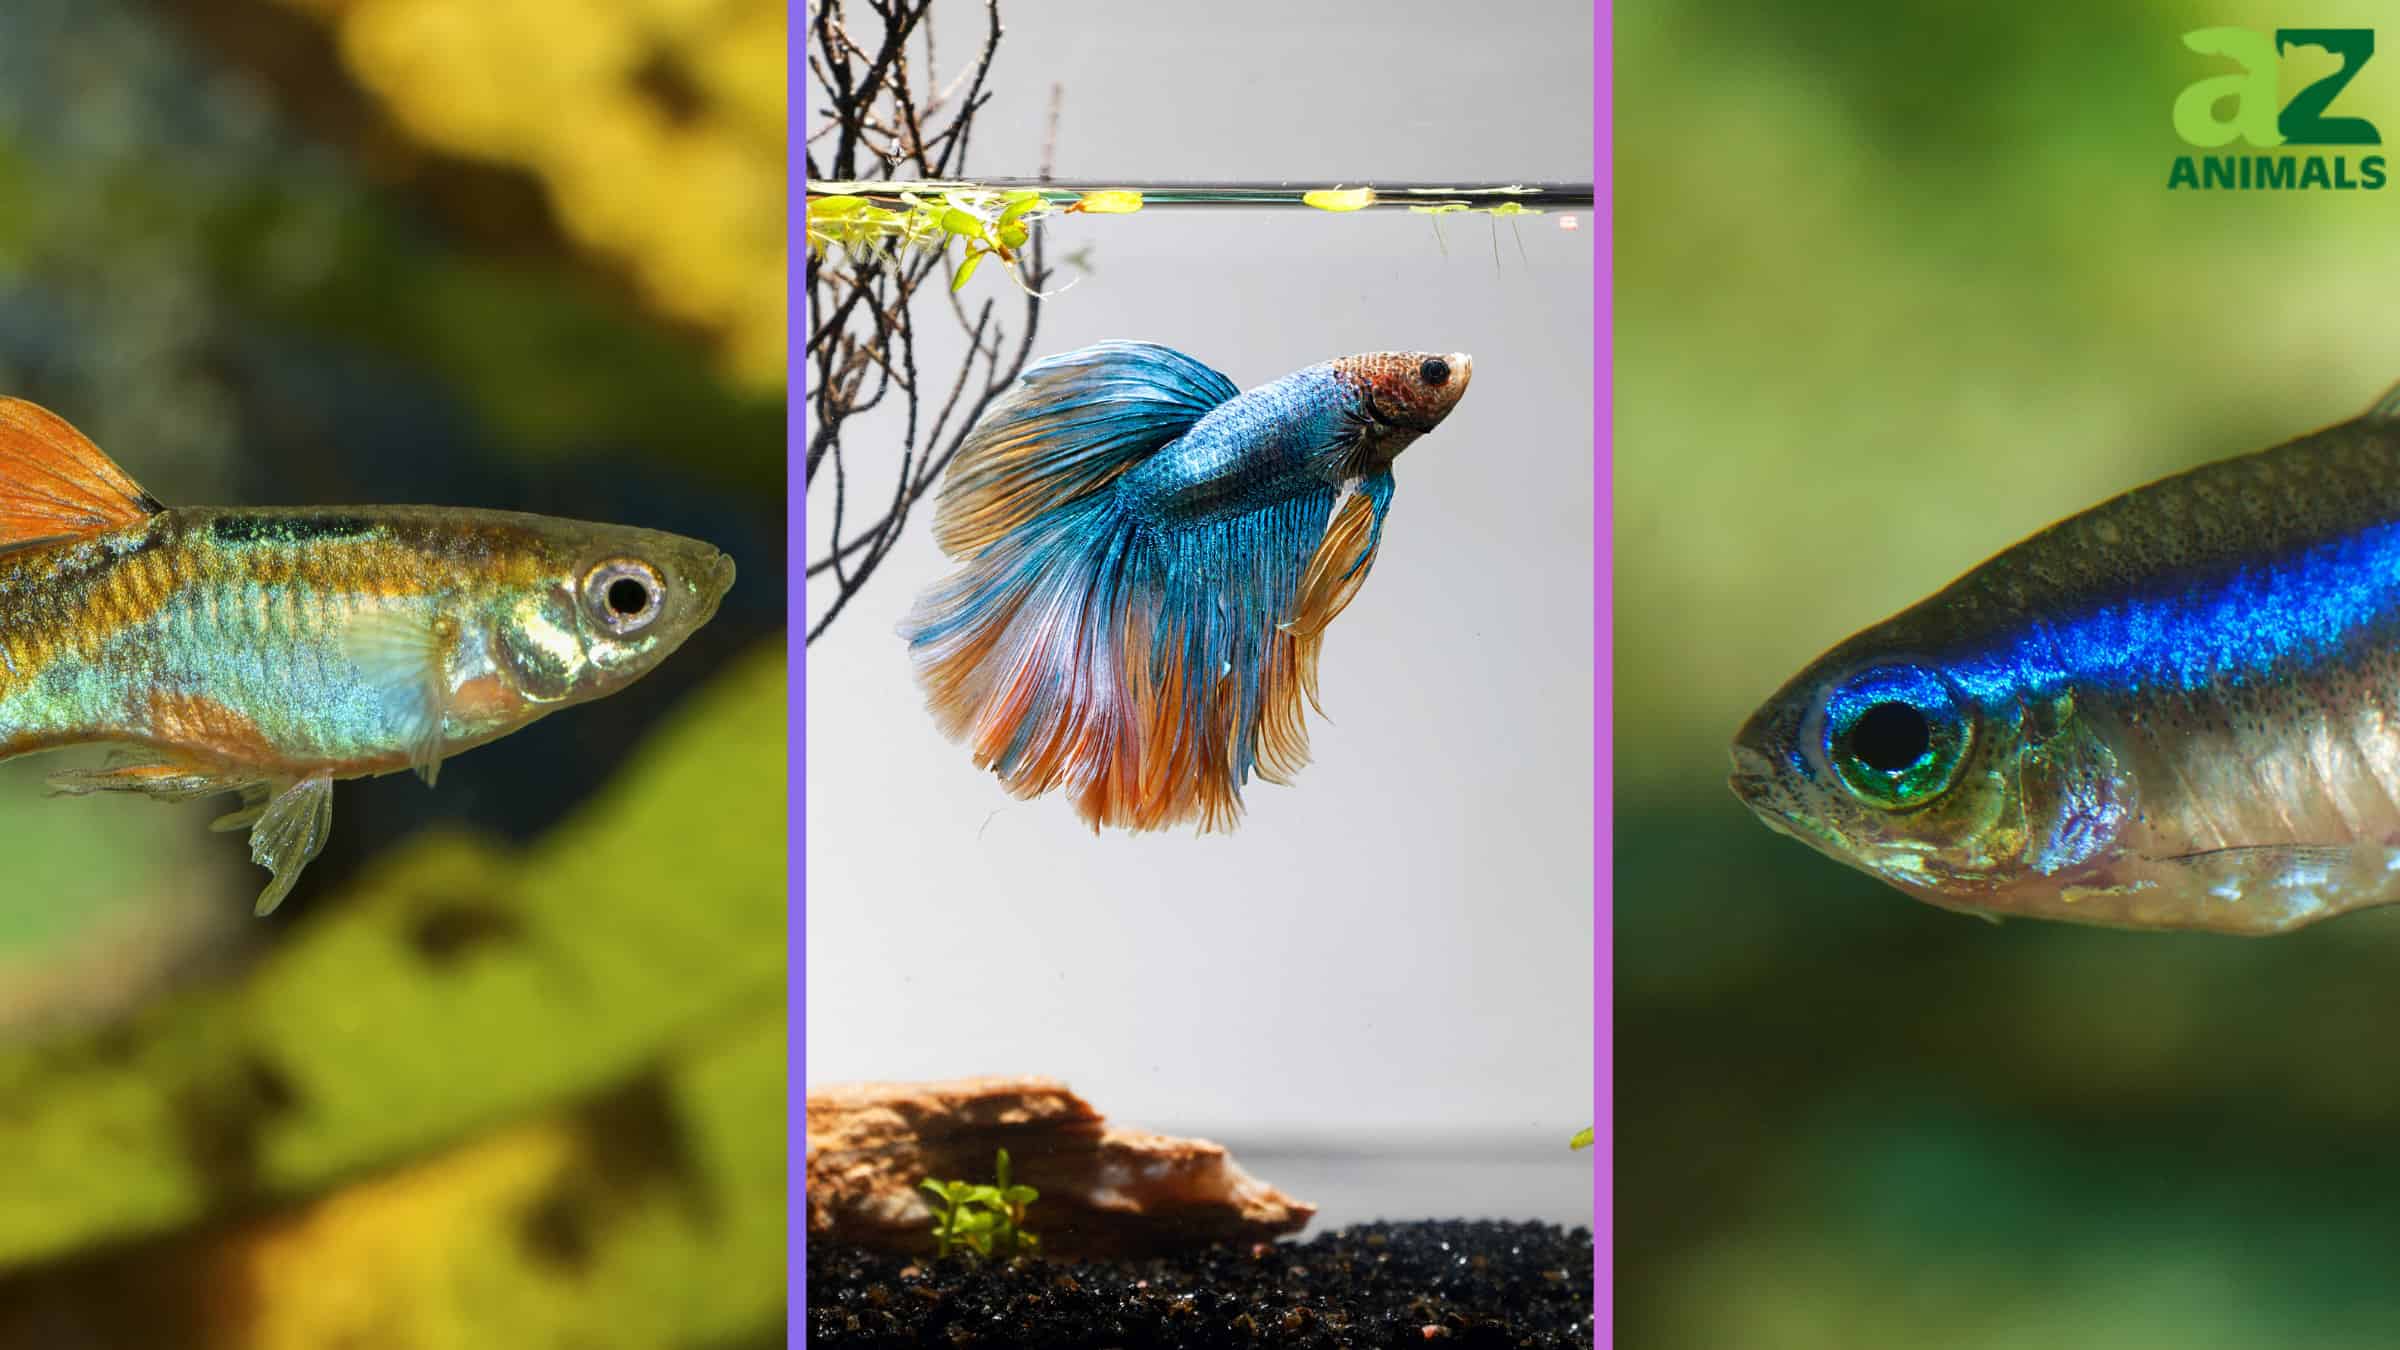 The 10 Most Colorful Freshwater Fish to Liven Up Any Aquarium